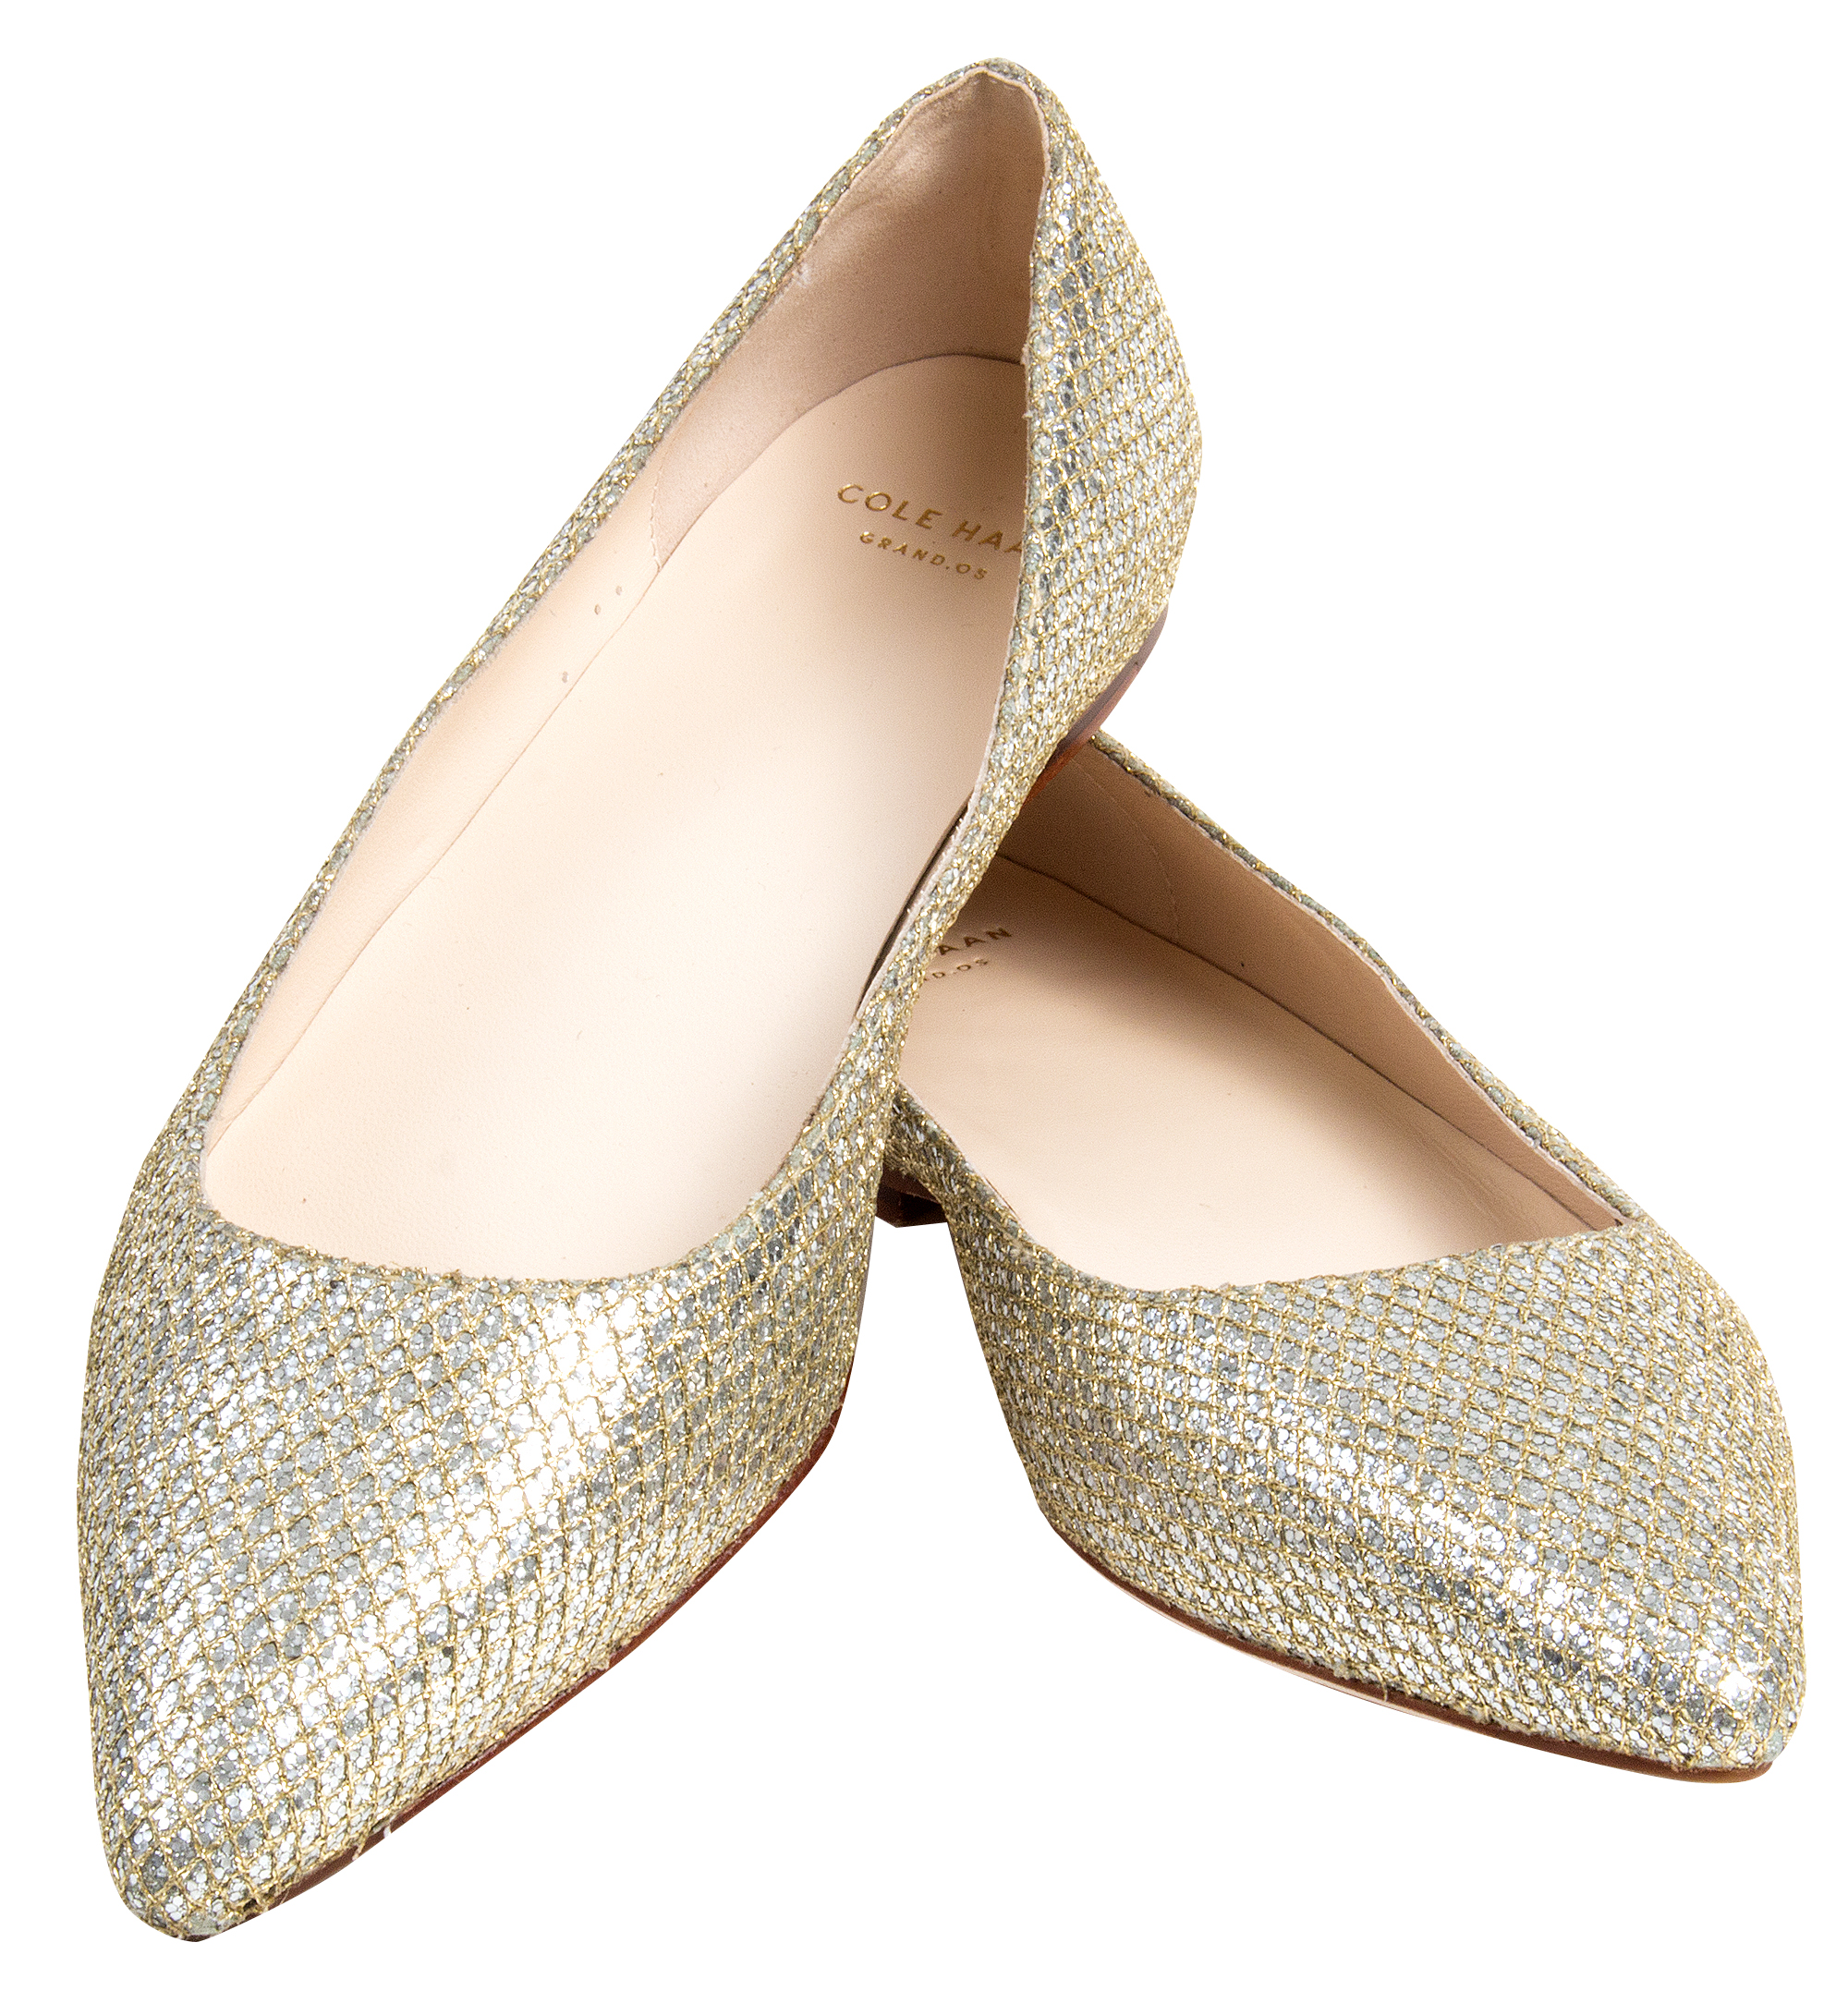 Cole Haan ”Tartine Skimmer Glitter” shoes, $198 at Gwynn’s of Mount Pleasant